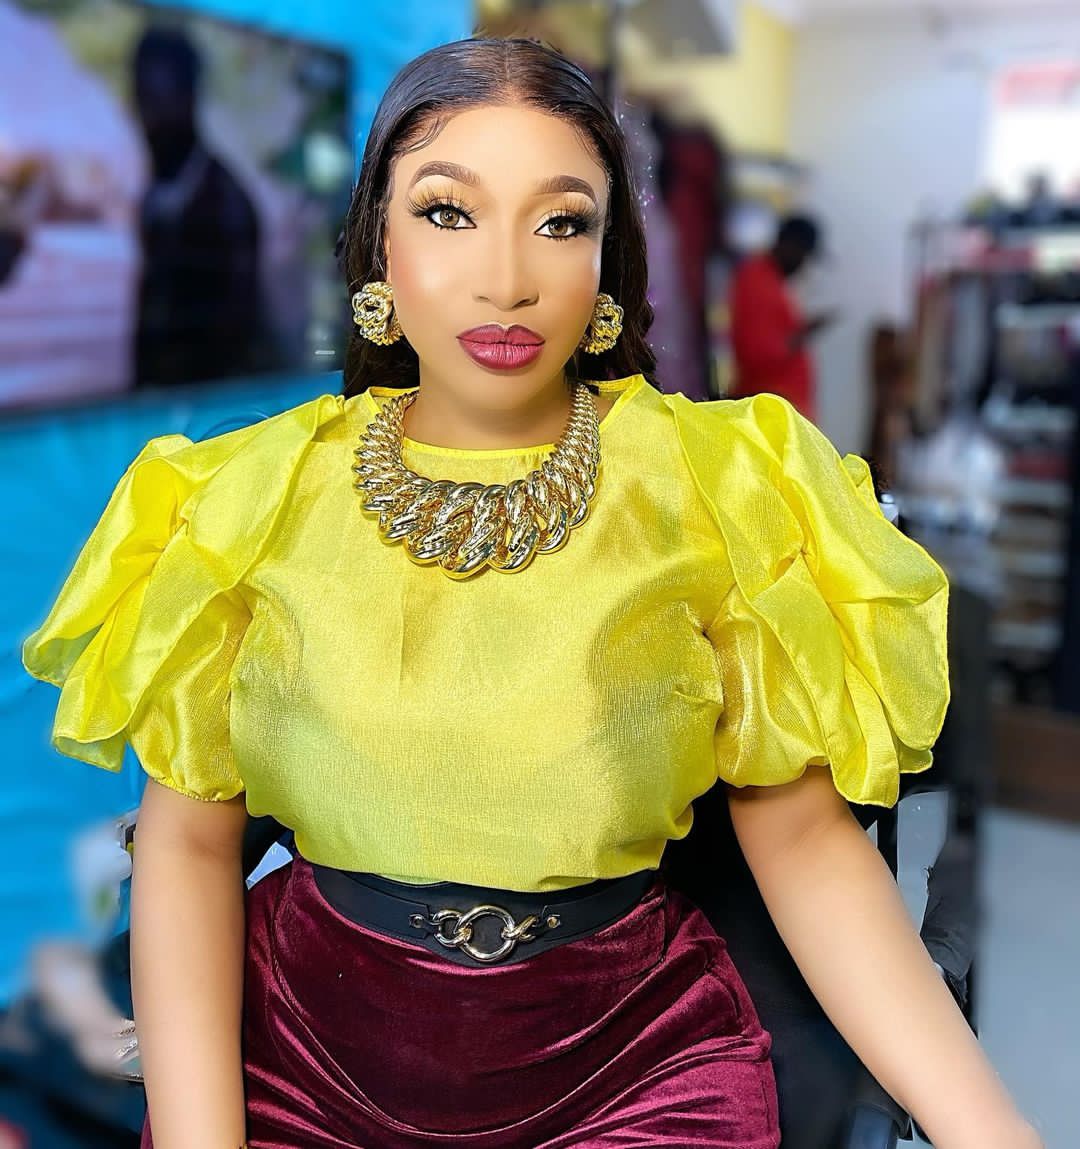 "I'm colour blind, i see colours in shades of grey" - Actress, Tonto Dikeh shares facts about herself